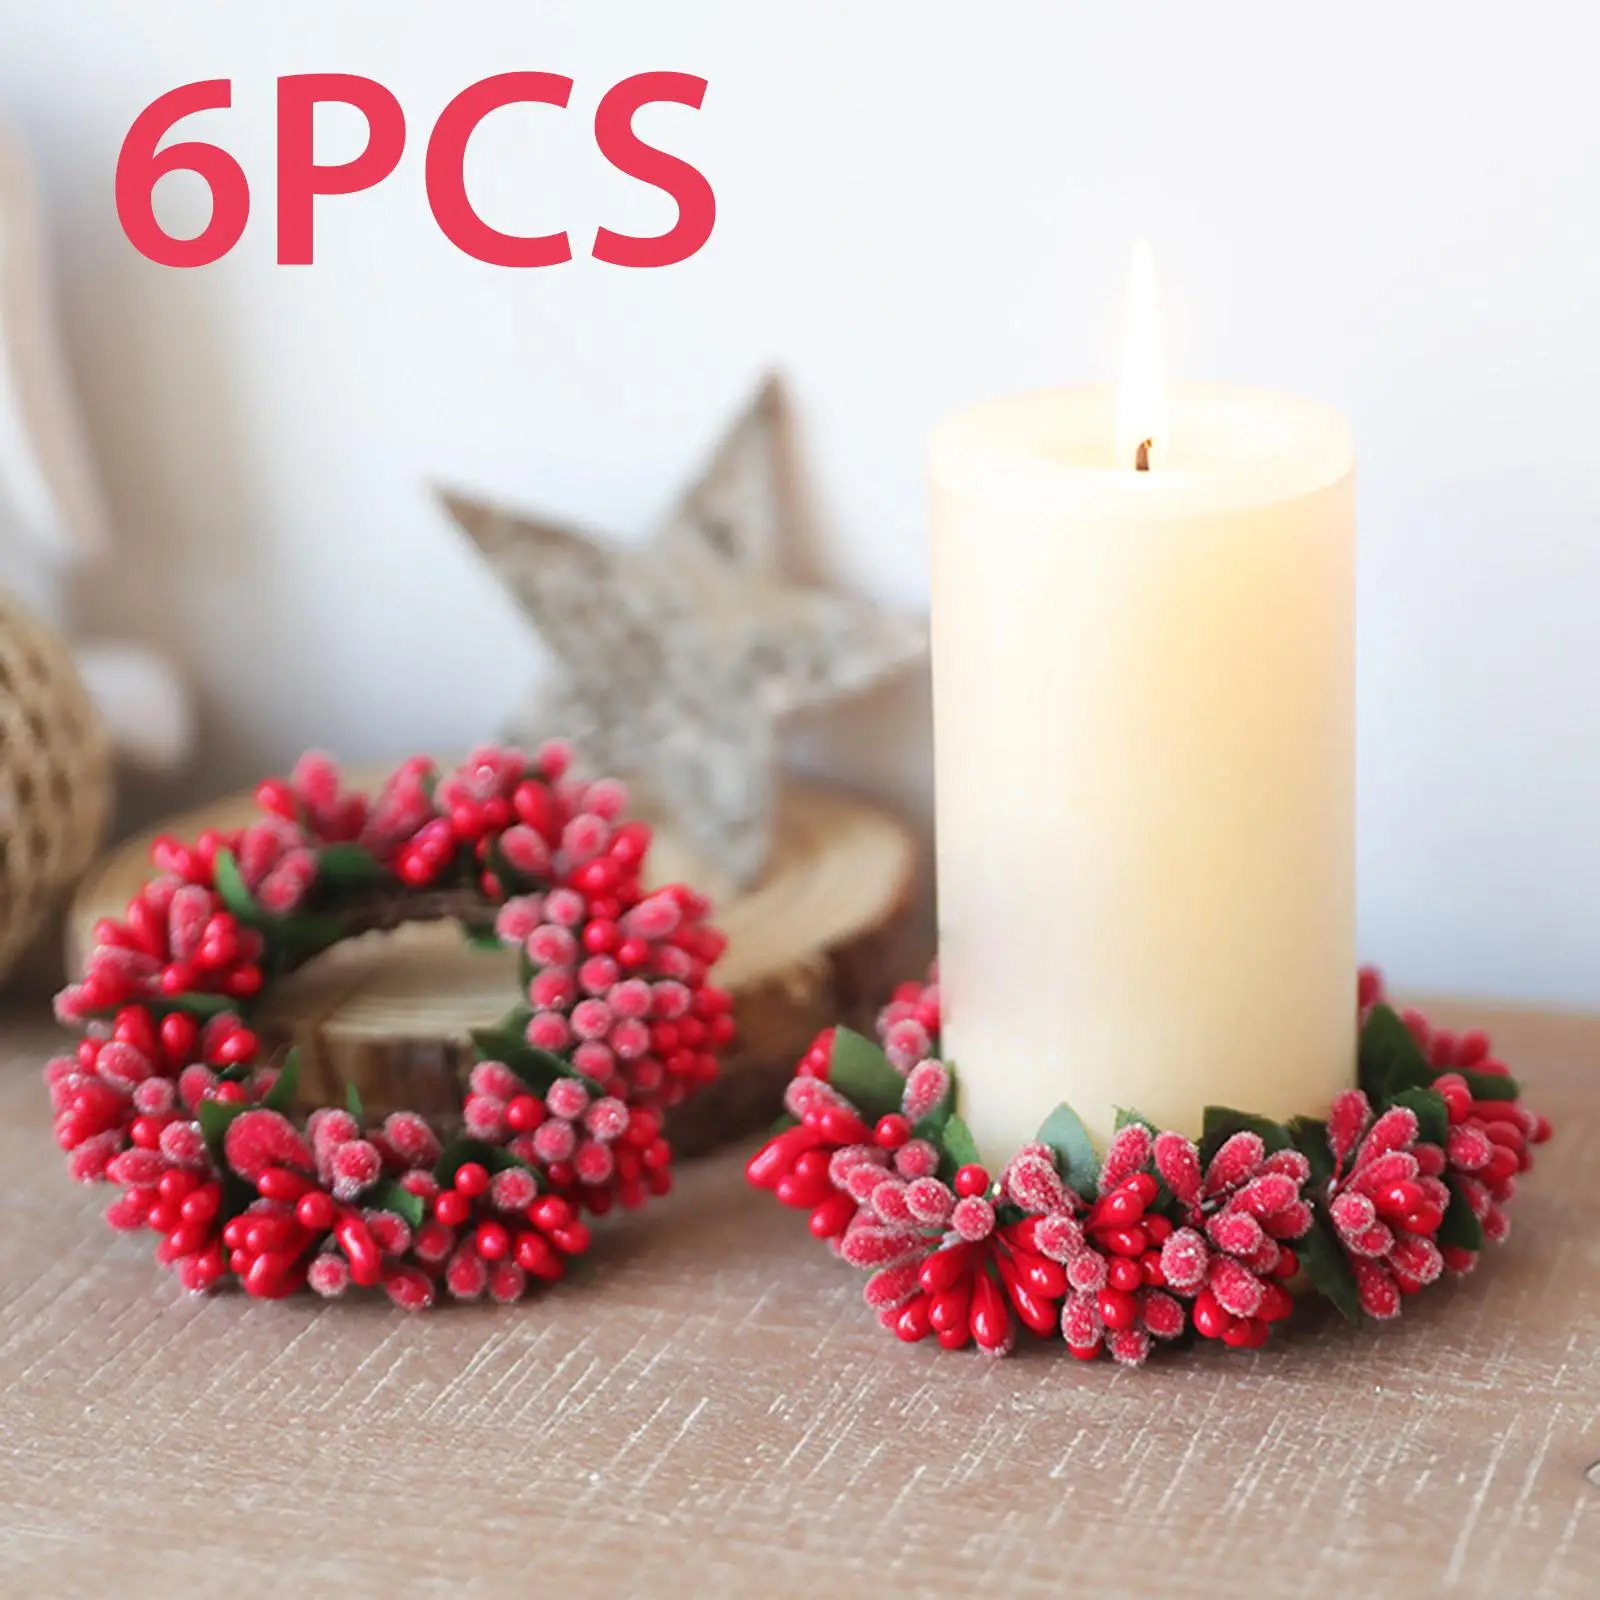 6x Red Berries Candle Ring Wreath Ornament Decorative Candle Holder Greenery Wreath for Home Tabletop Dinner Party Decorations